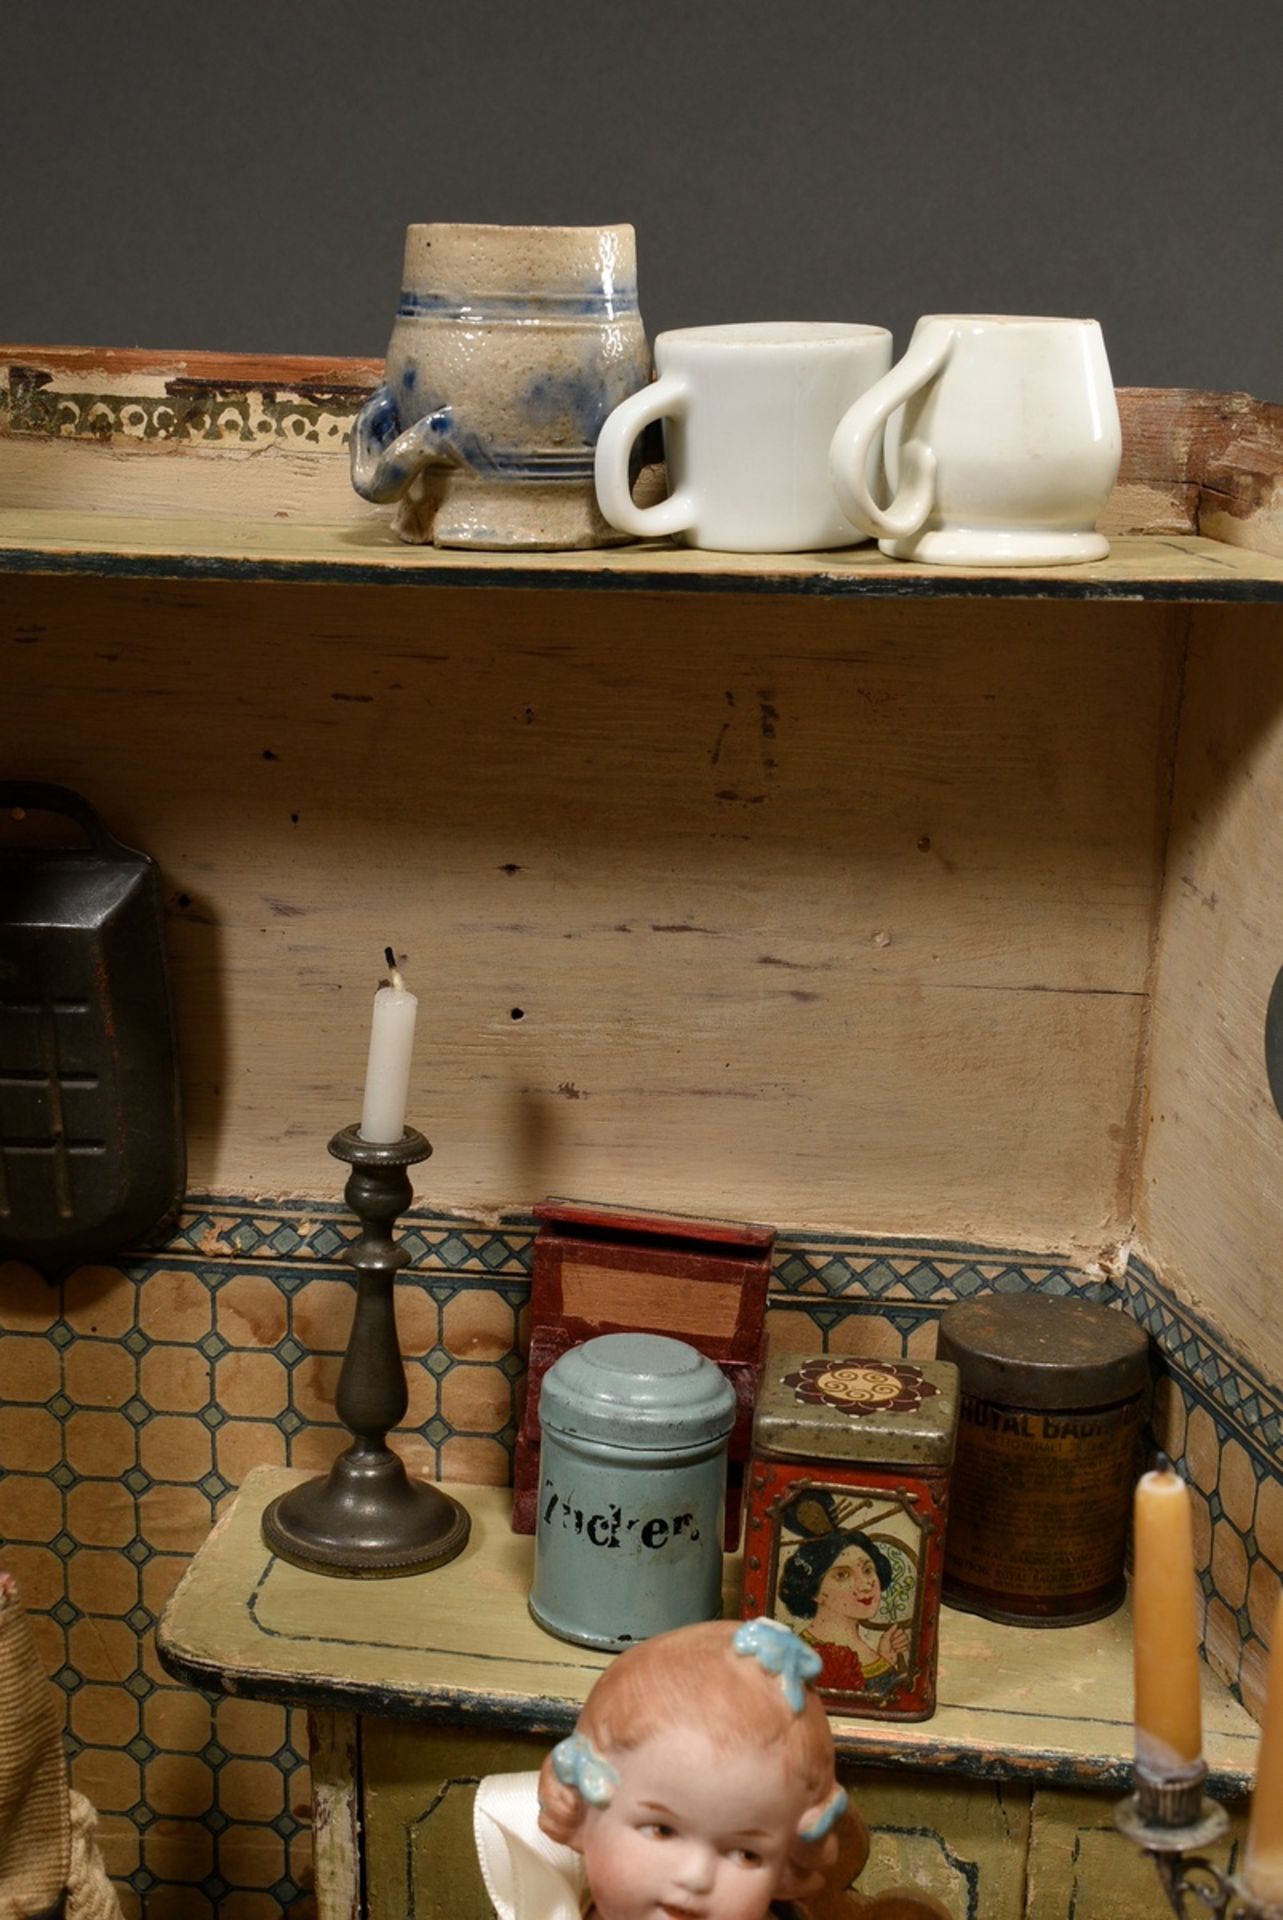 Wilhelminian period doll's kitchen with rich interior, metal cooker, earthenware and porcelain, pew - Image 11 of 18